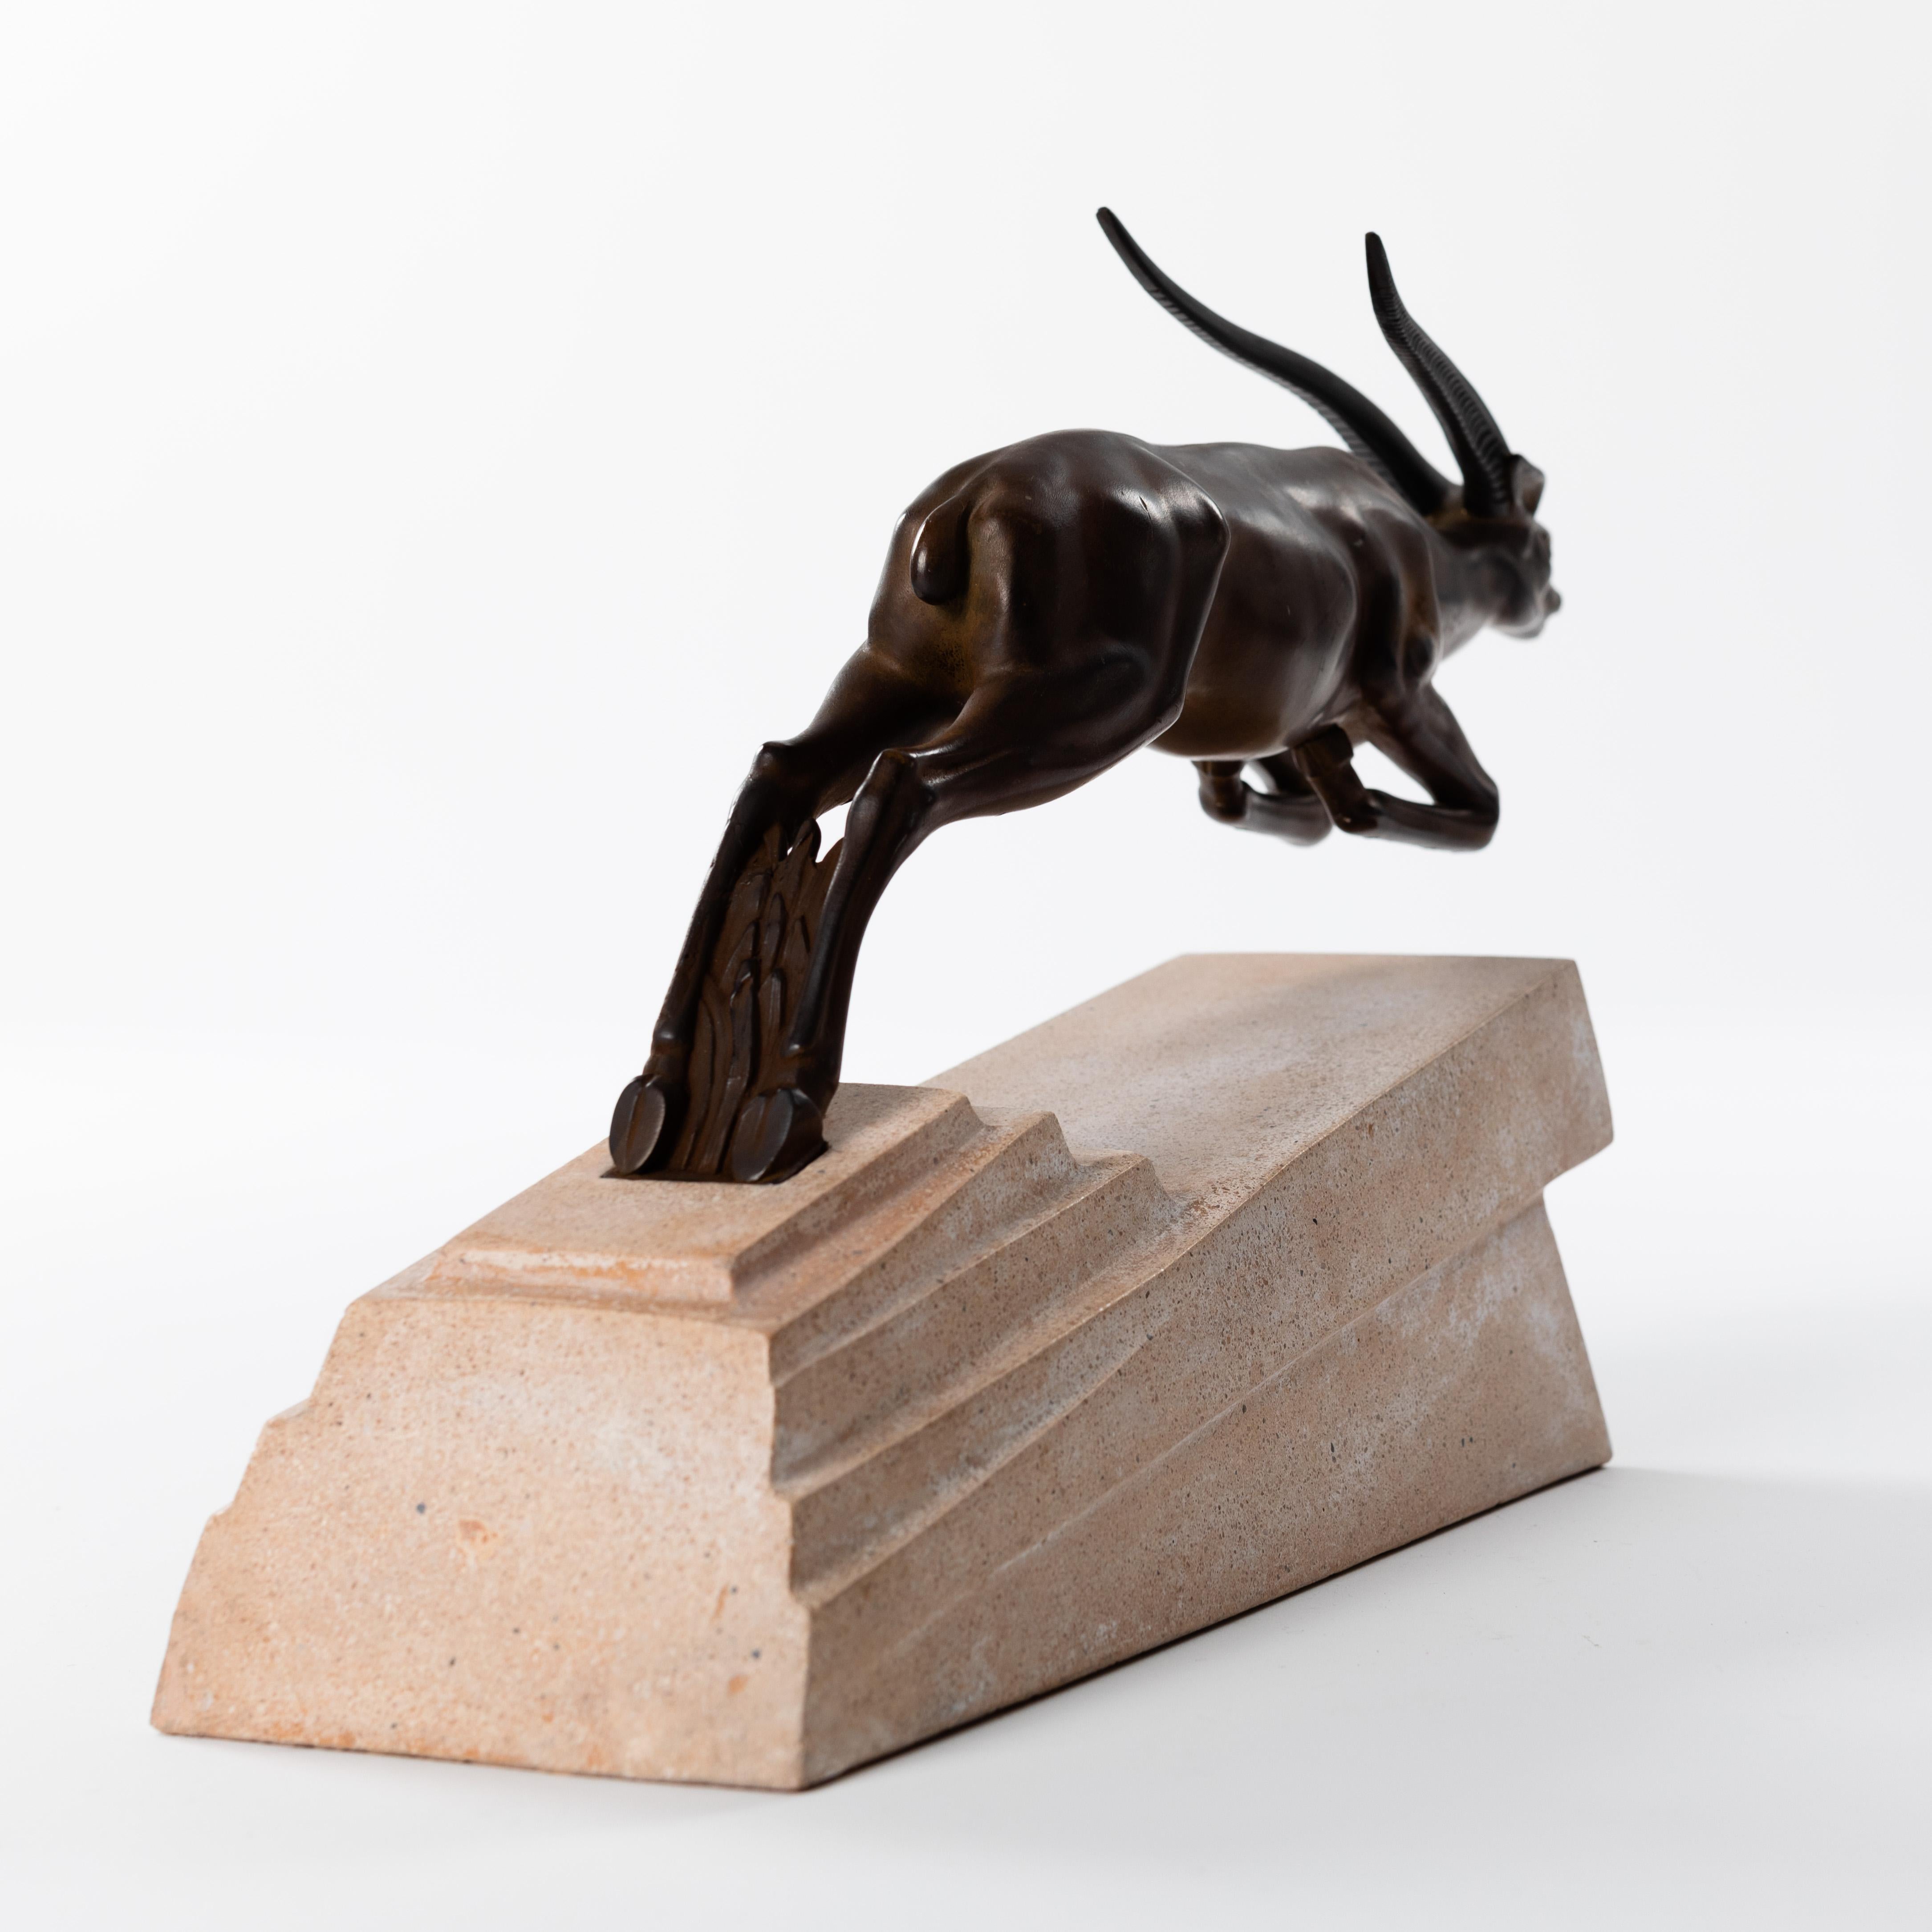 French Art Déco Bronze Antilope Scultpure on Stone Base by Max Le Verrier 1920s For Sale 5